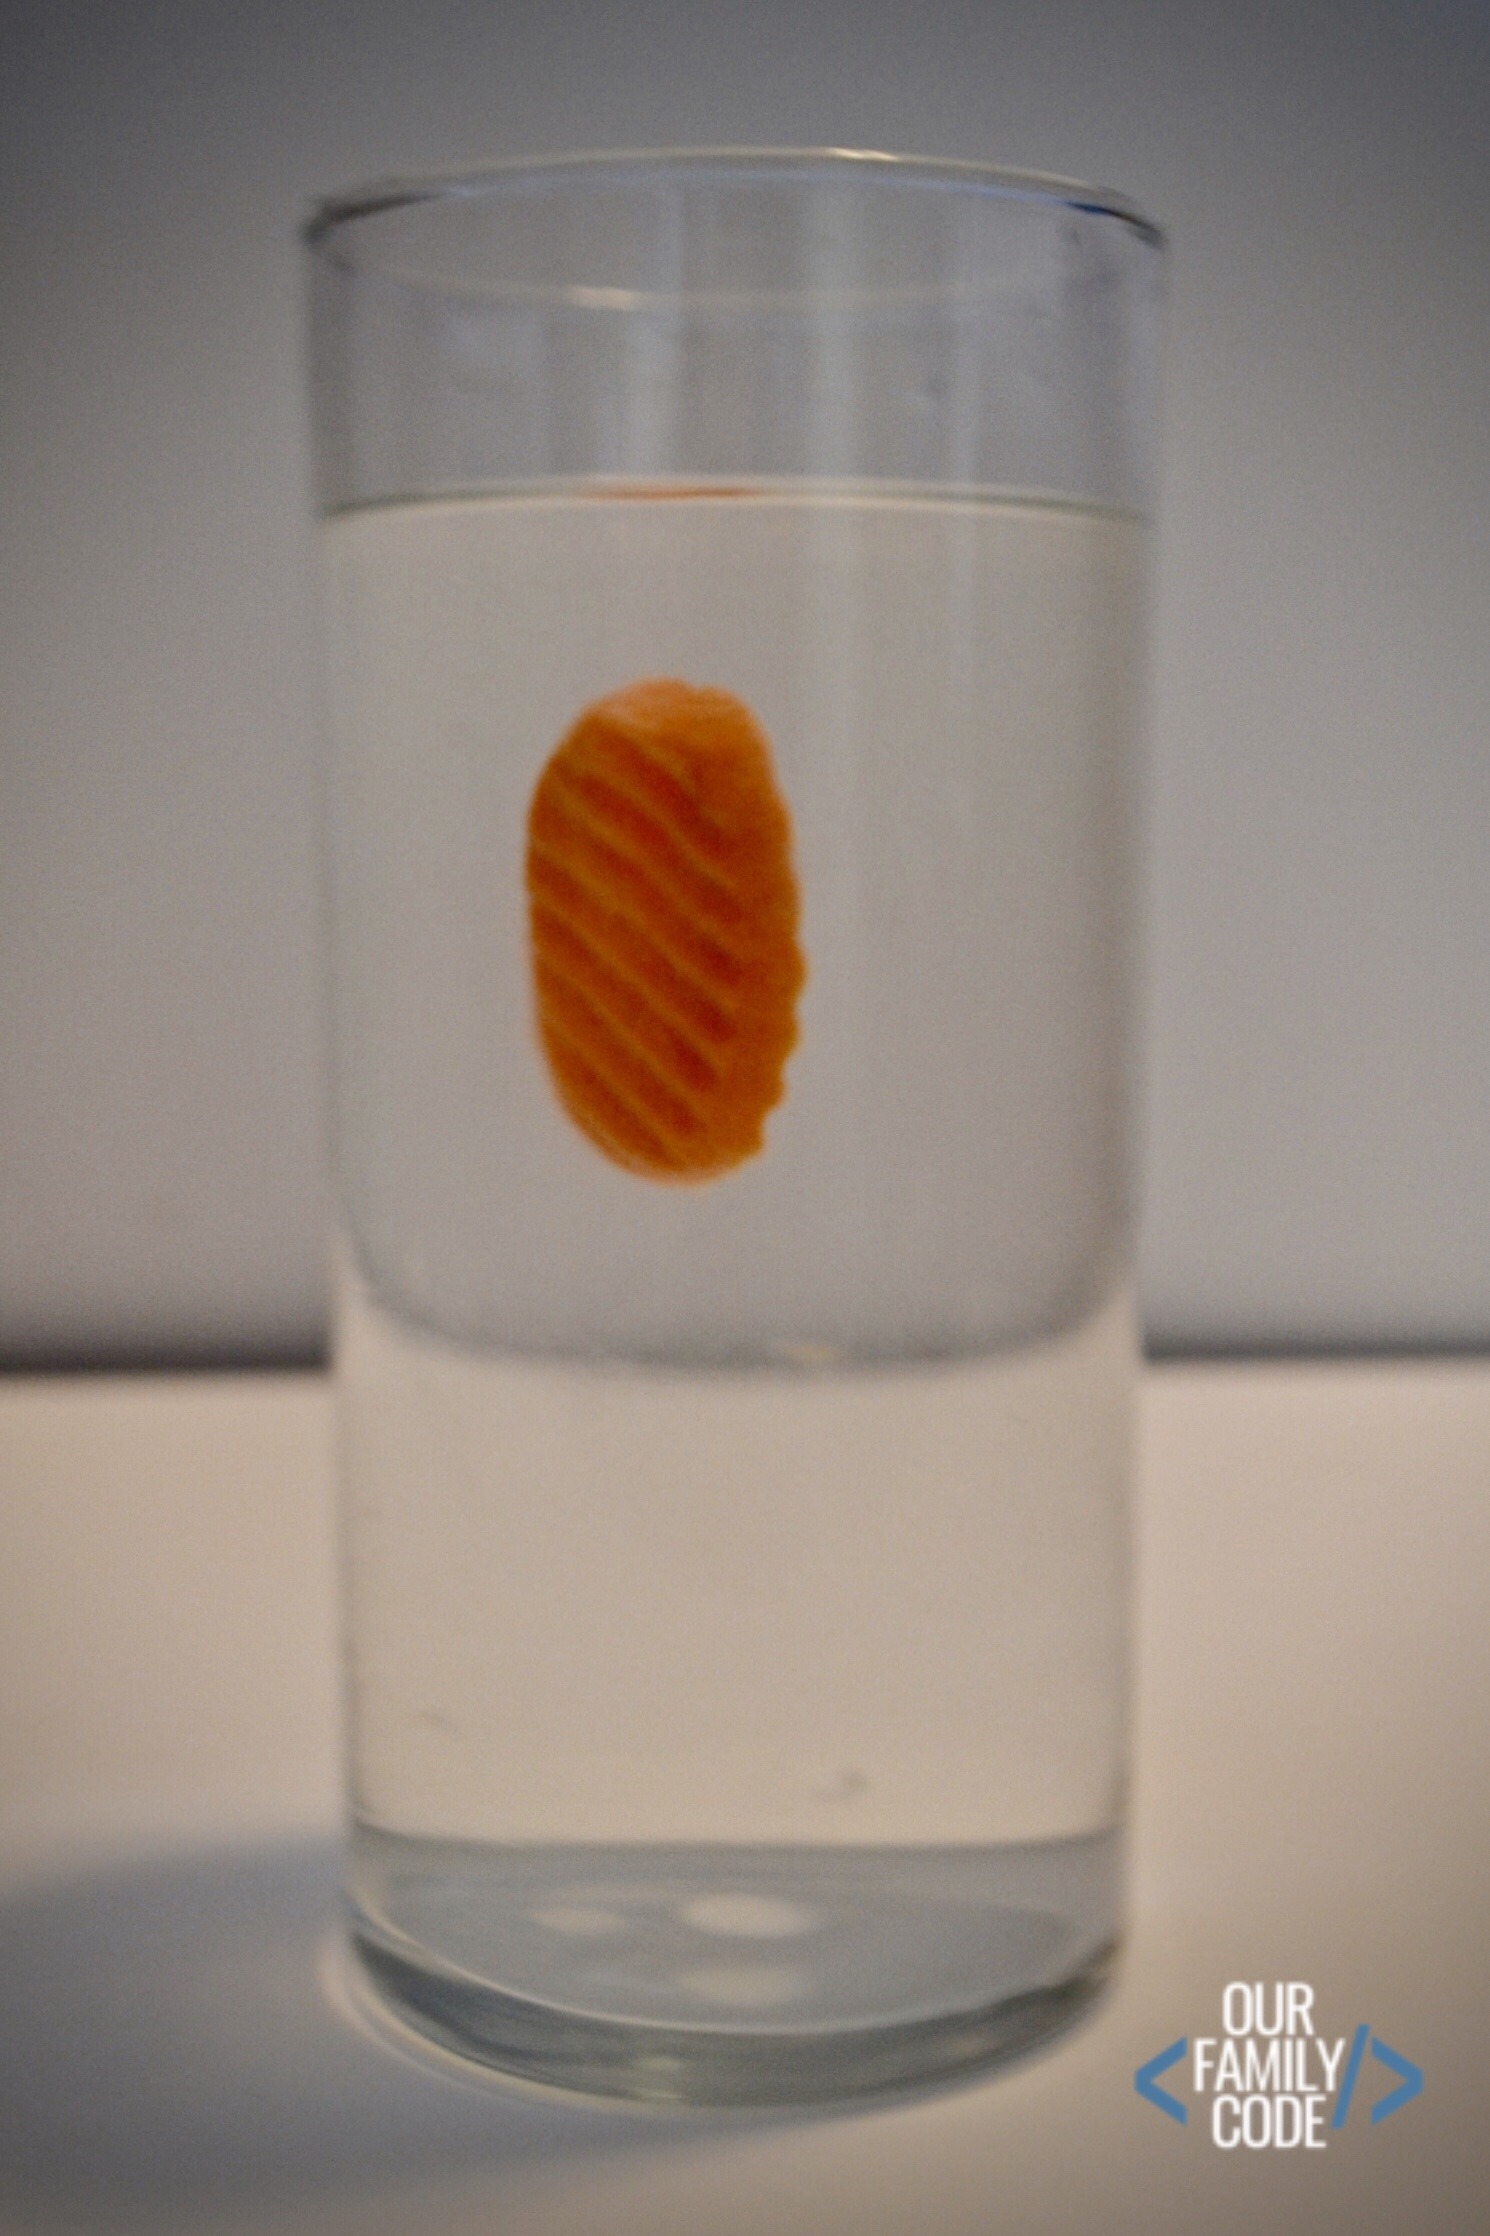 Hovering Carrot in Salt Water Density Experiment